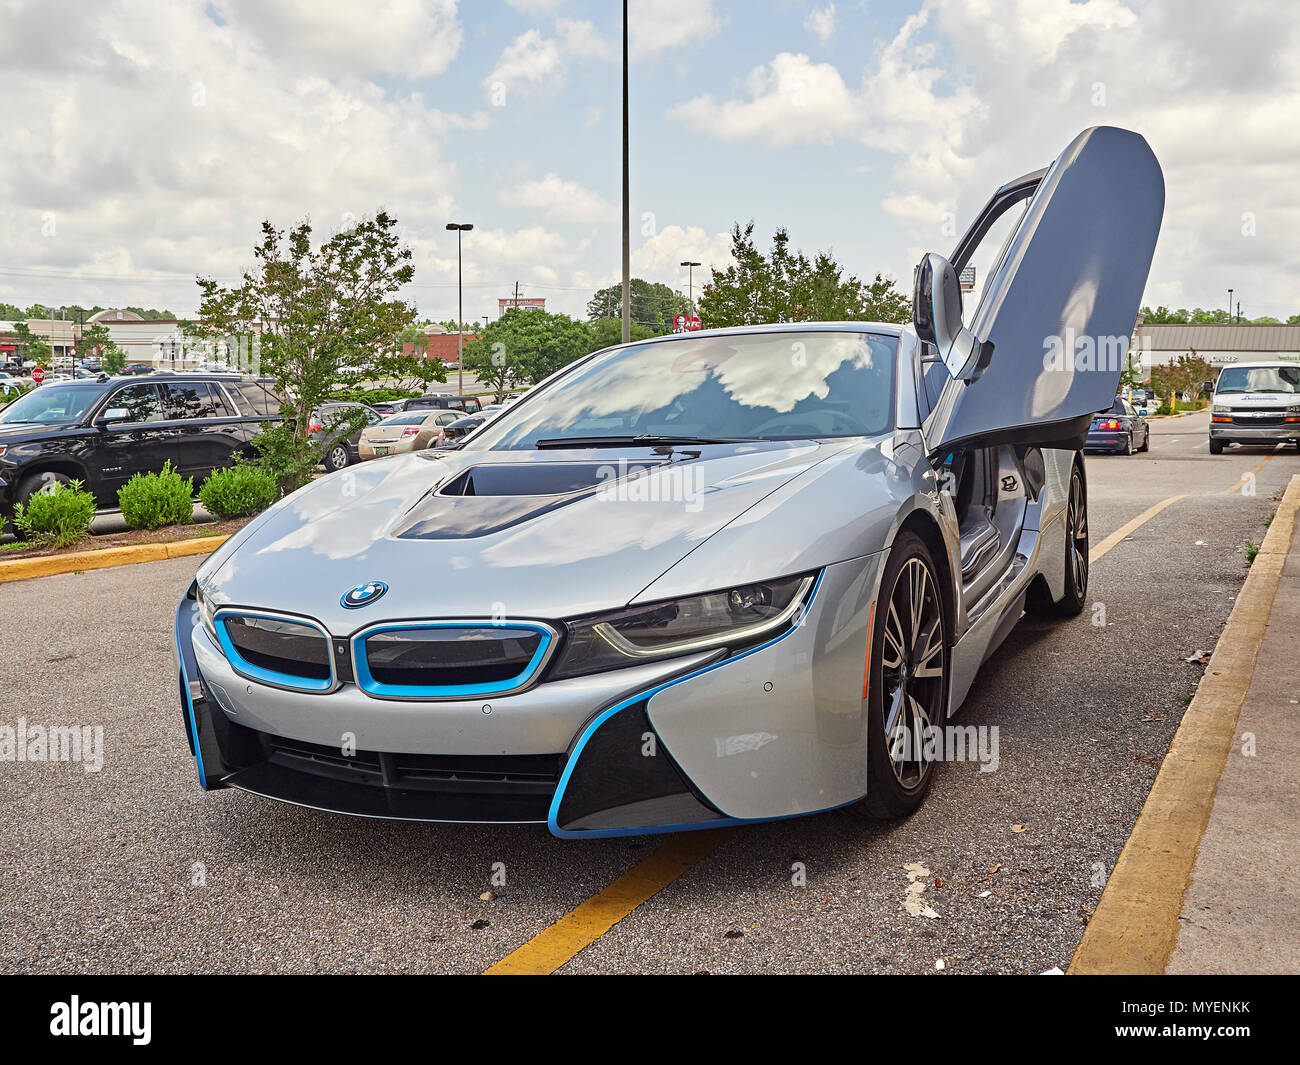 BMW i8 plug in hybrid super car or sports car parked at the curb with driver's door open showing the cockpit of the hybrid electric automobile in USA. Stock Photo